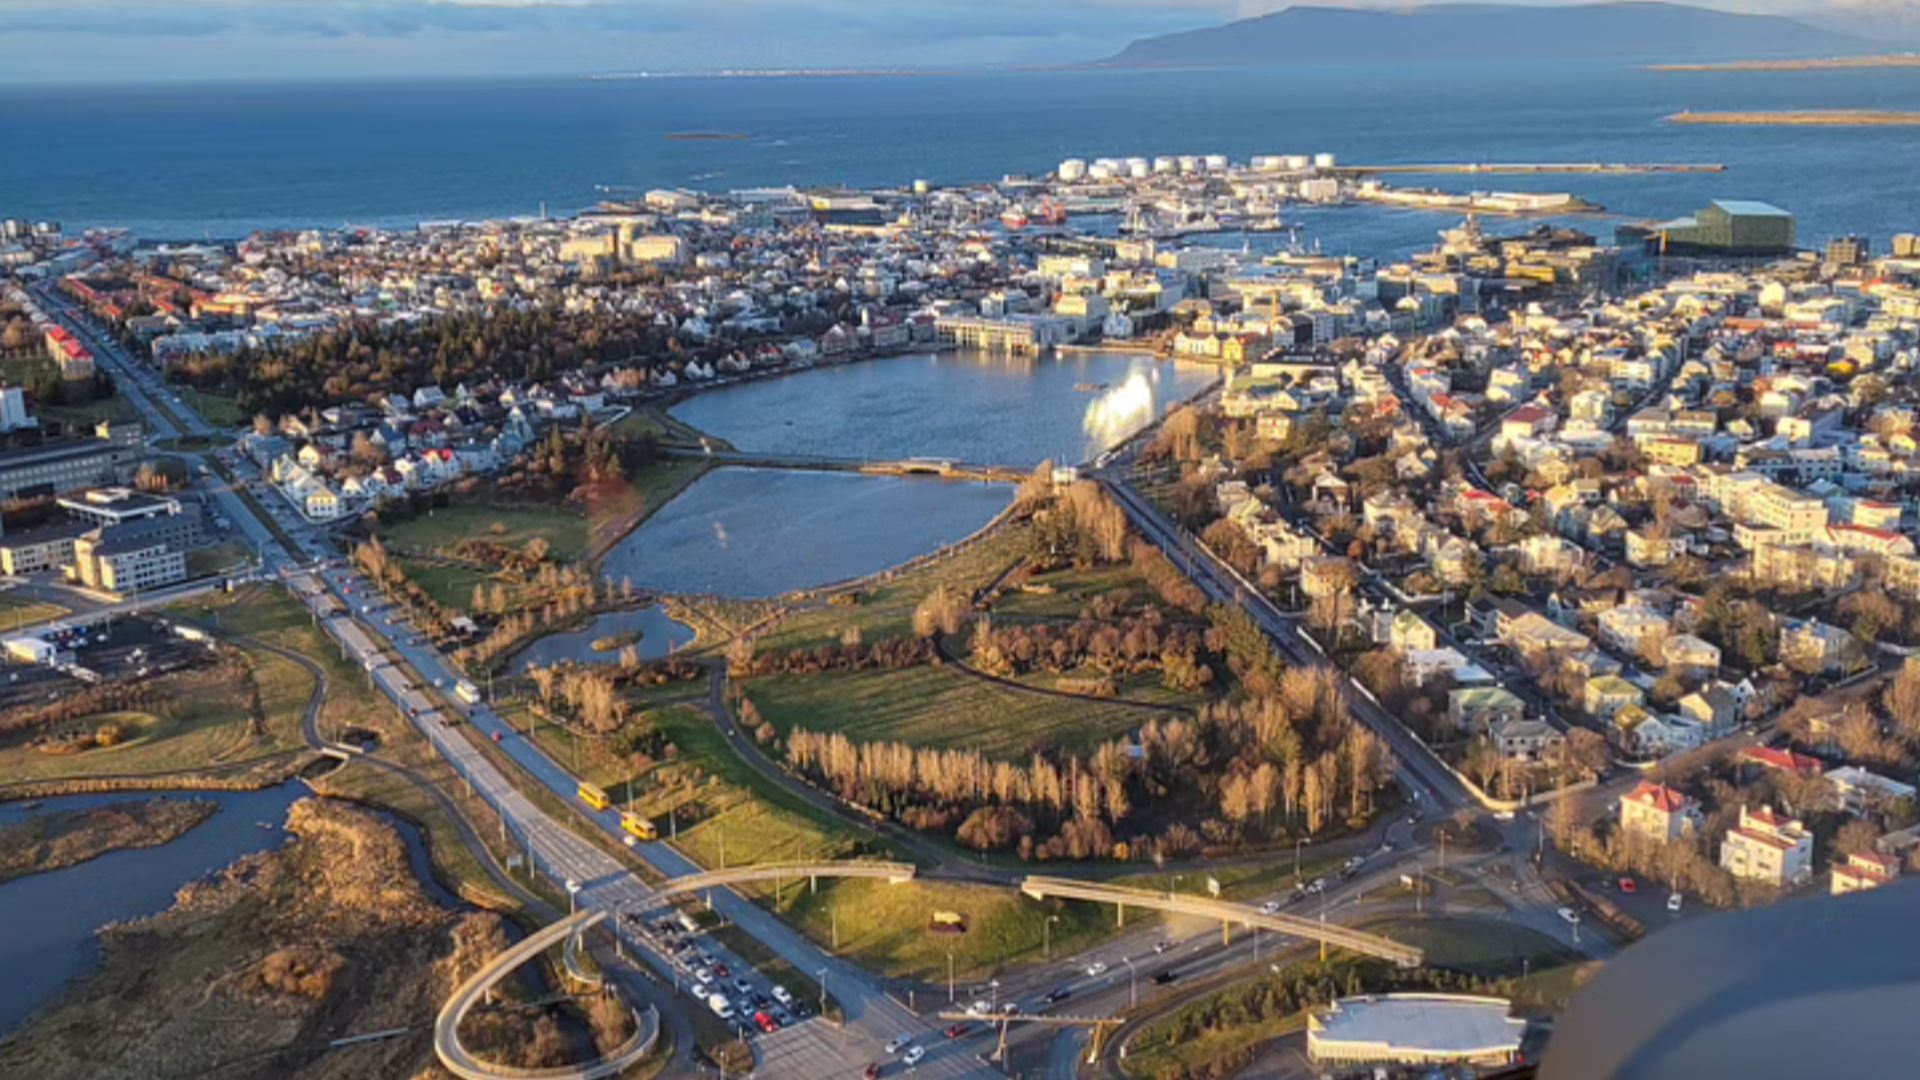 A view of Reykjavik city from the helicopter during the tour